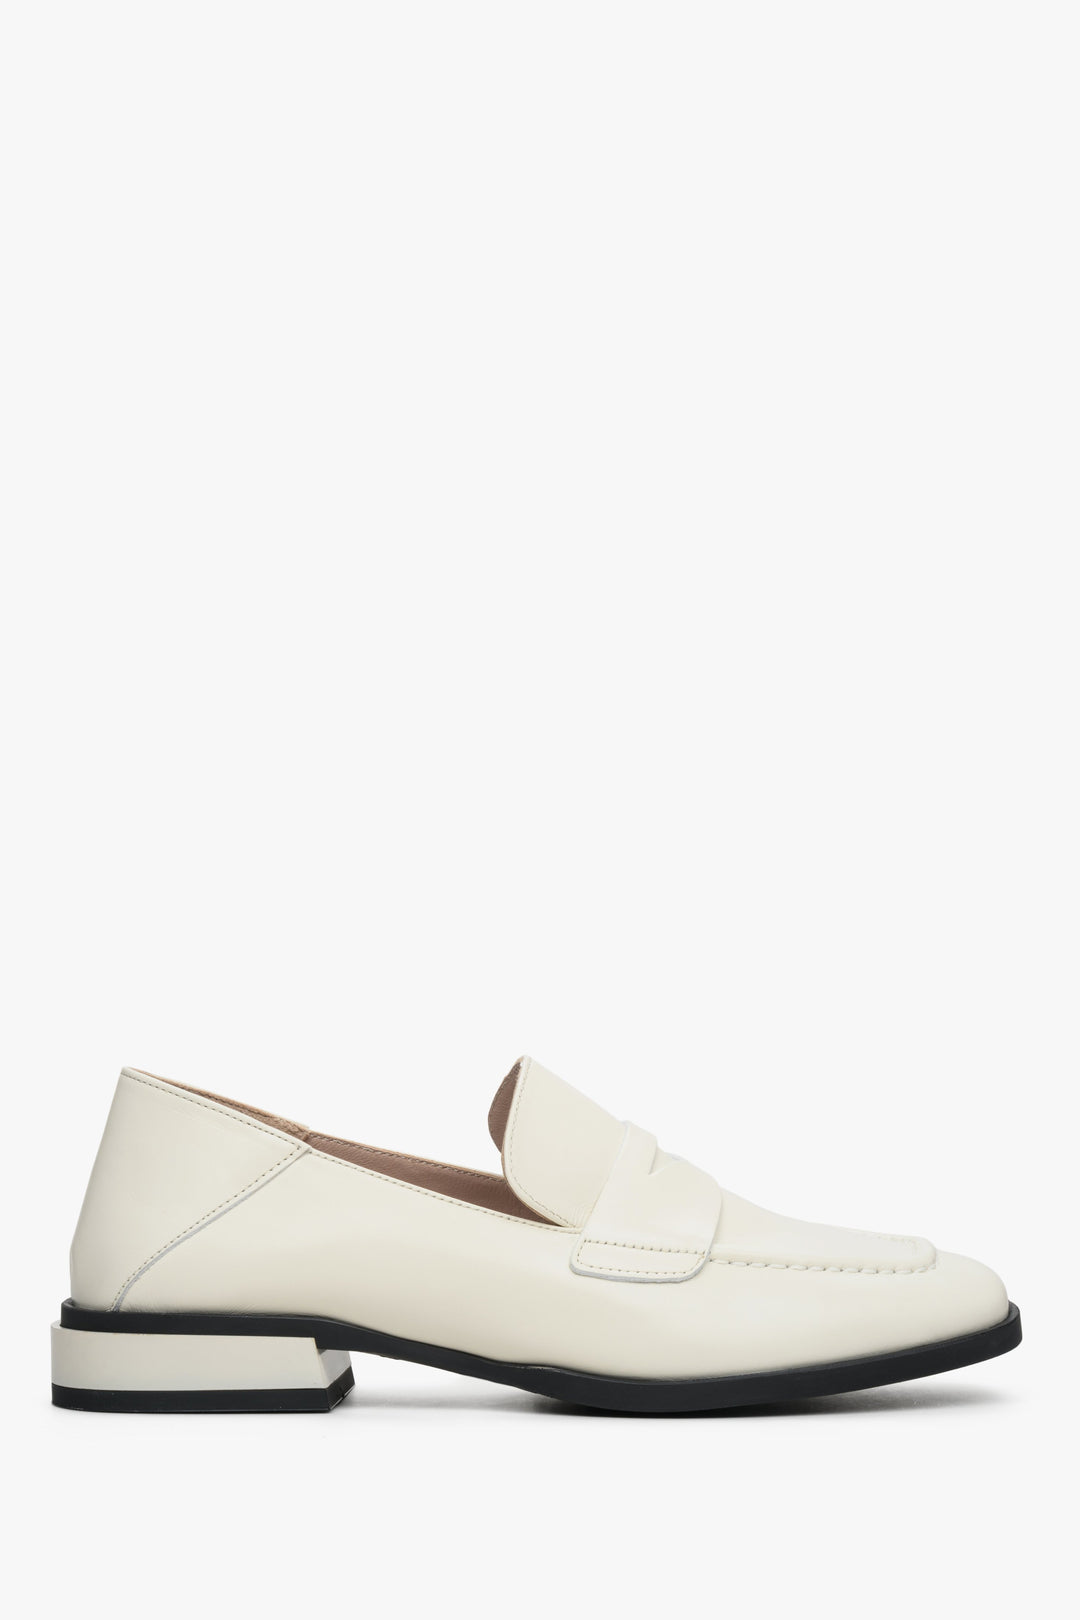 Women's white leather loafers with a low heel by Estro - shoe profile presentation.